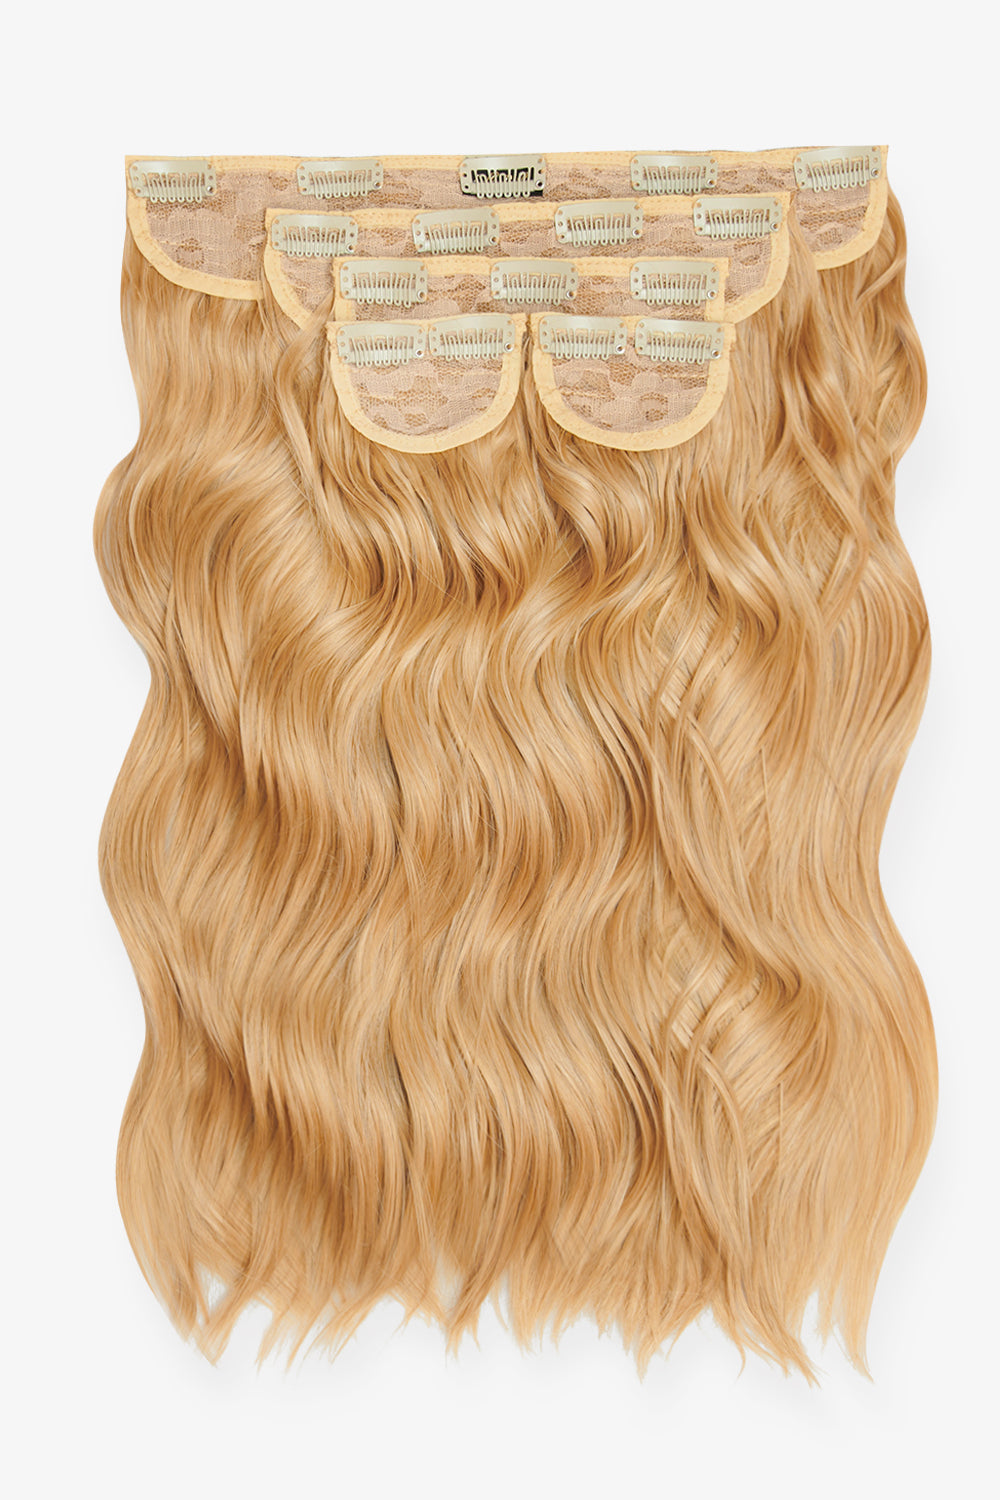 Super Thick 16’’ 5 Piece Brushed Out Wave Clip In Hair Extensions - Caramel Blonde